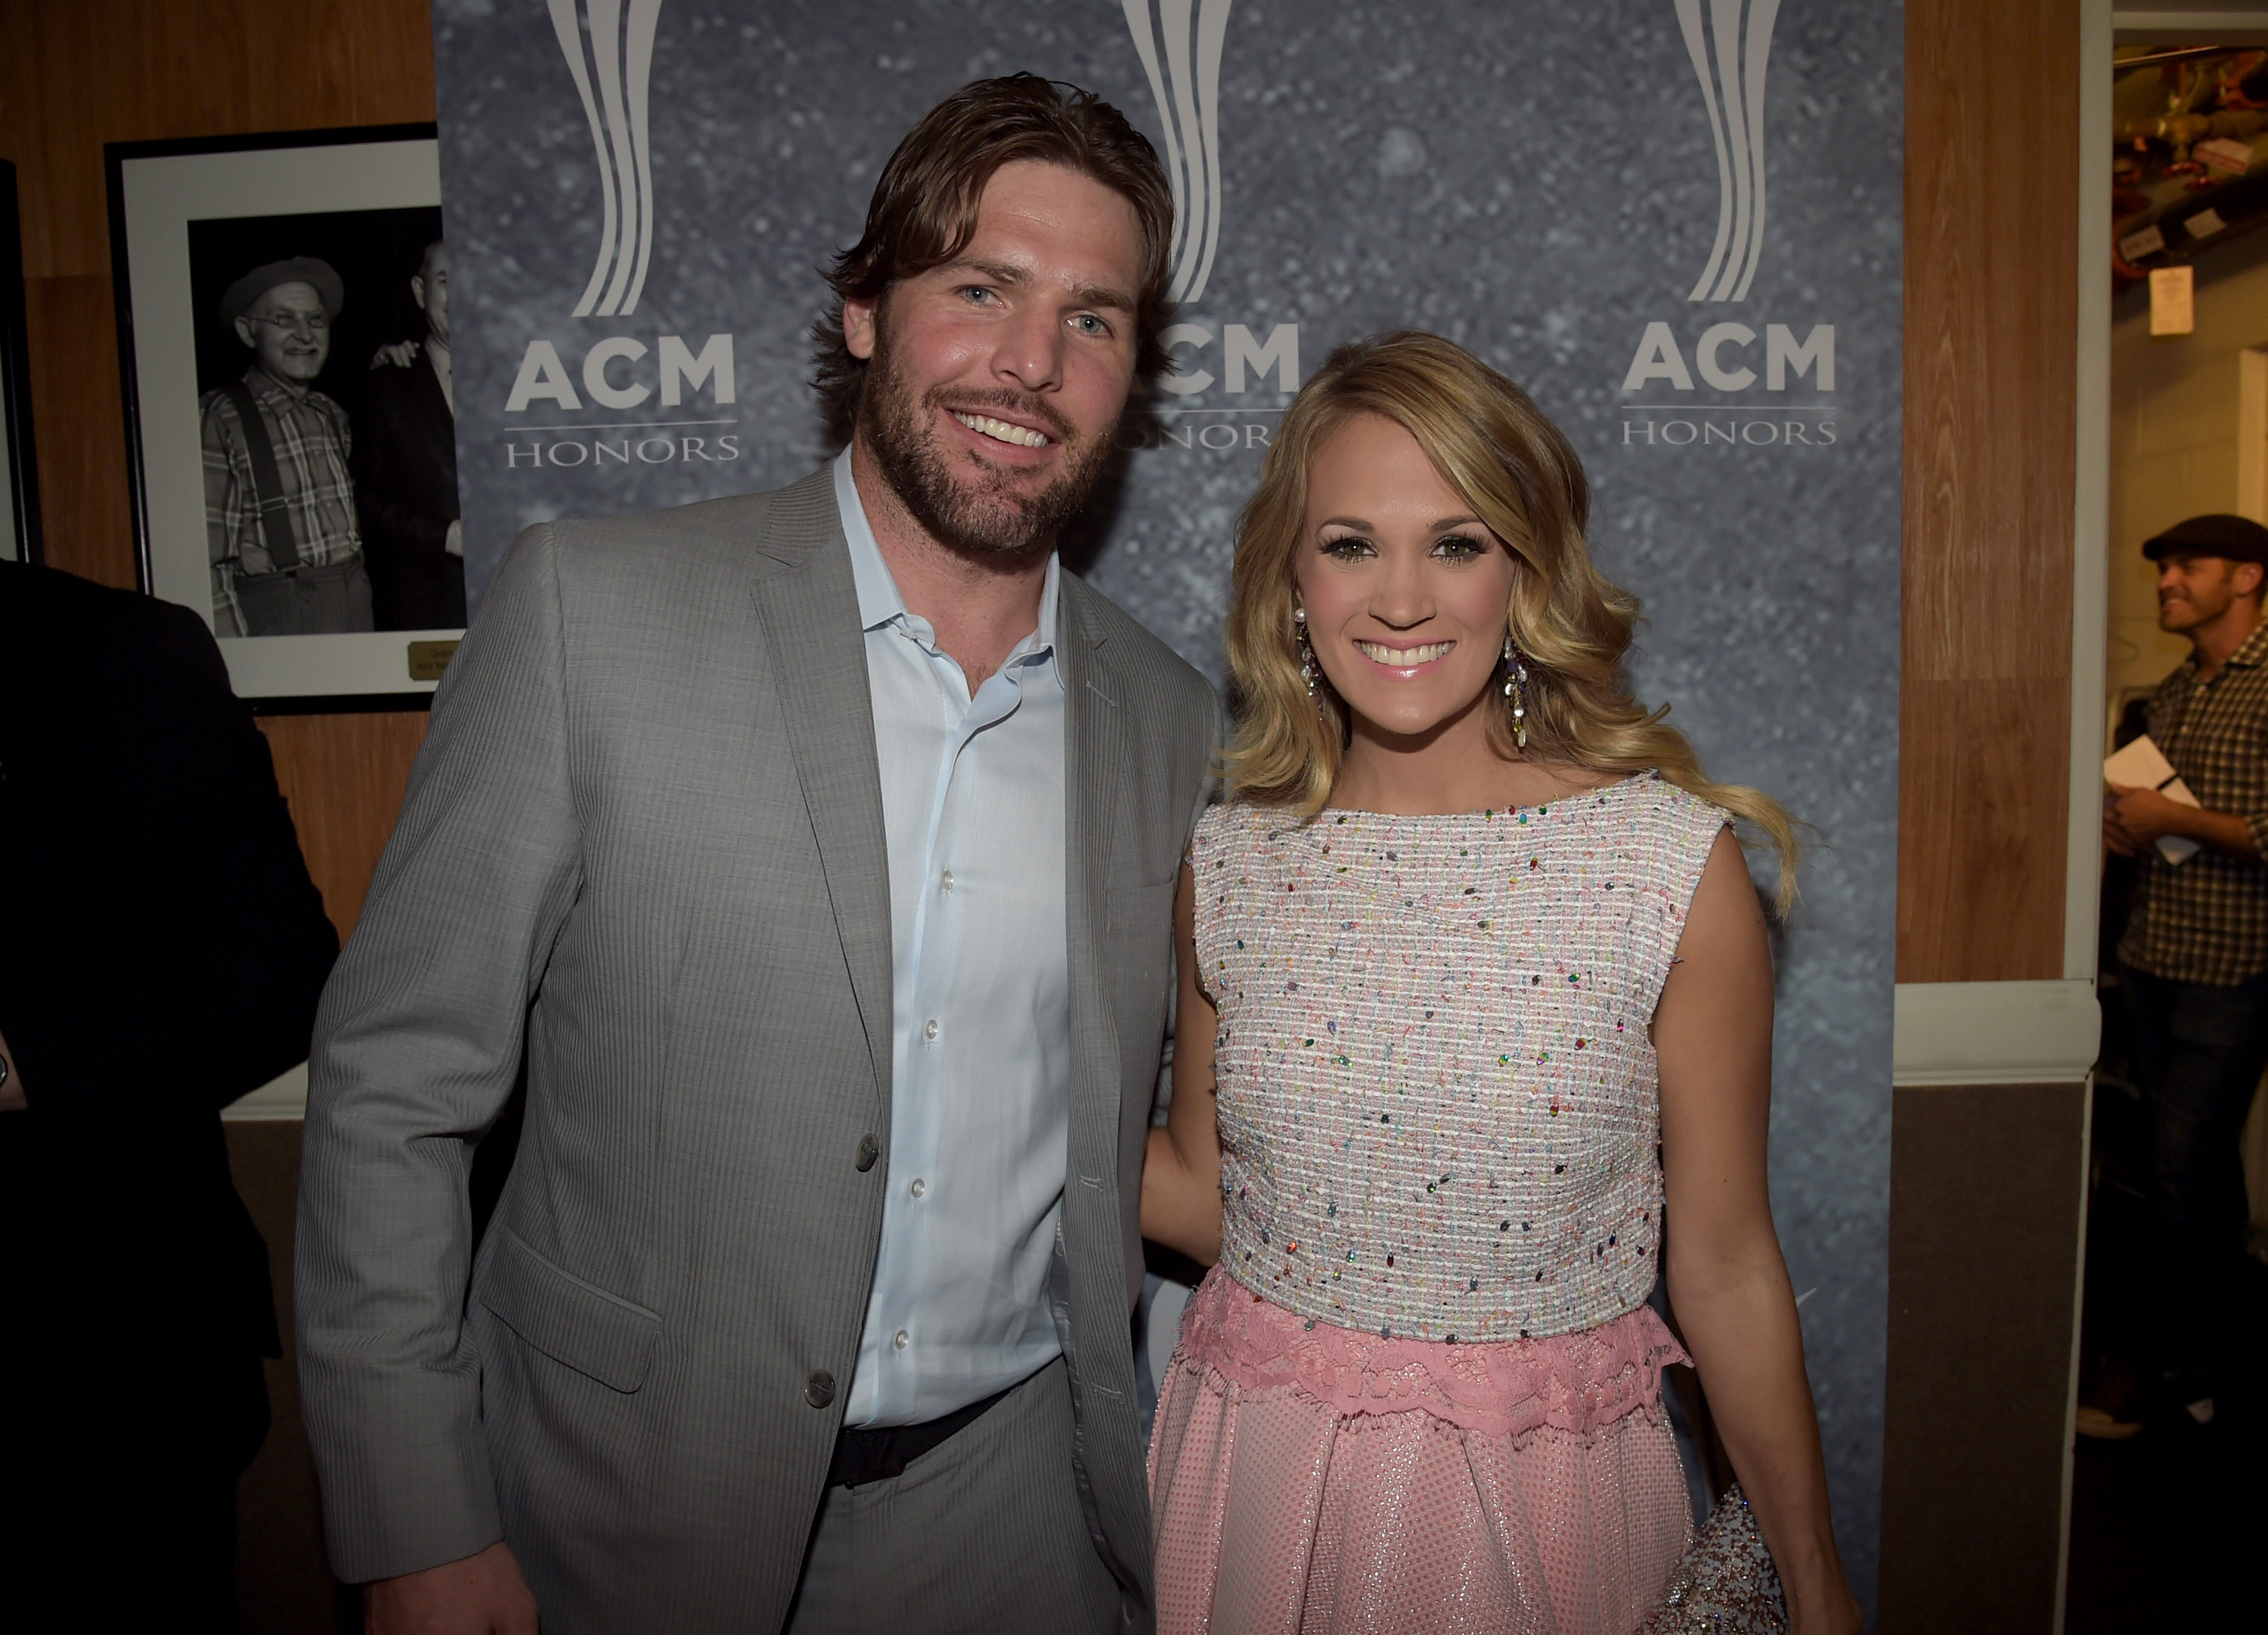 Carrie Underwood's Husband Mike Fisher Always Wanted 'to Have a Wife Like'  His 'Mom